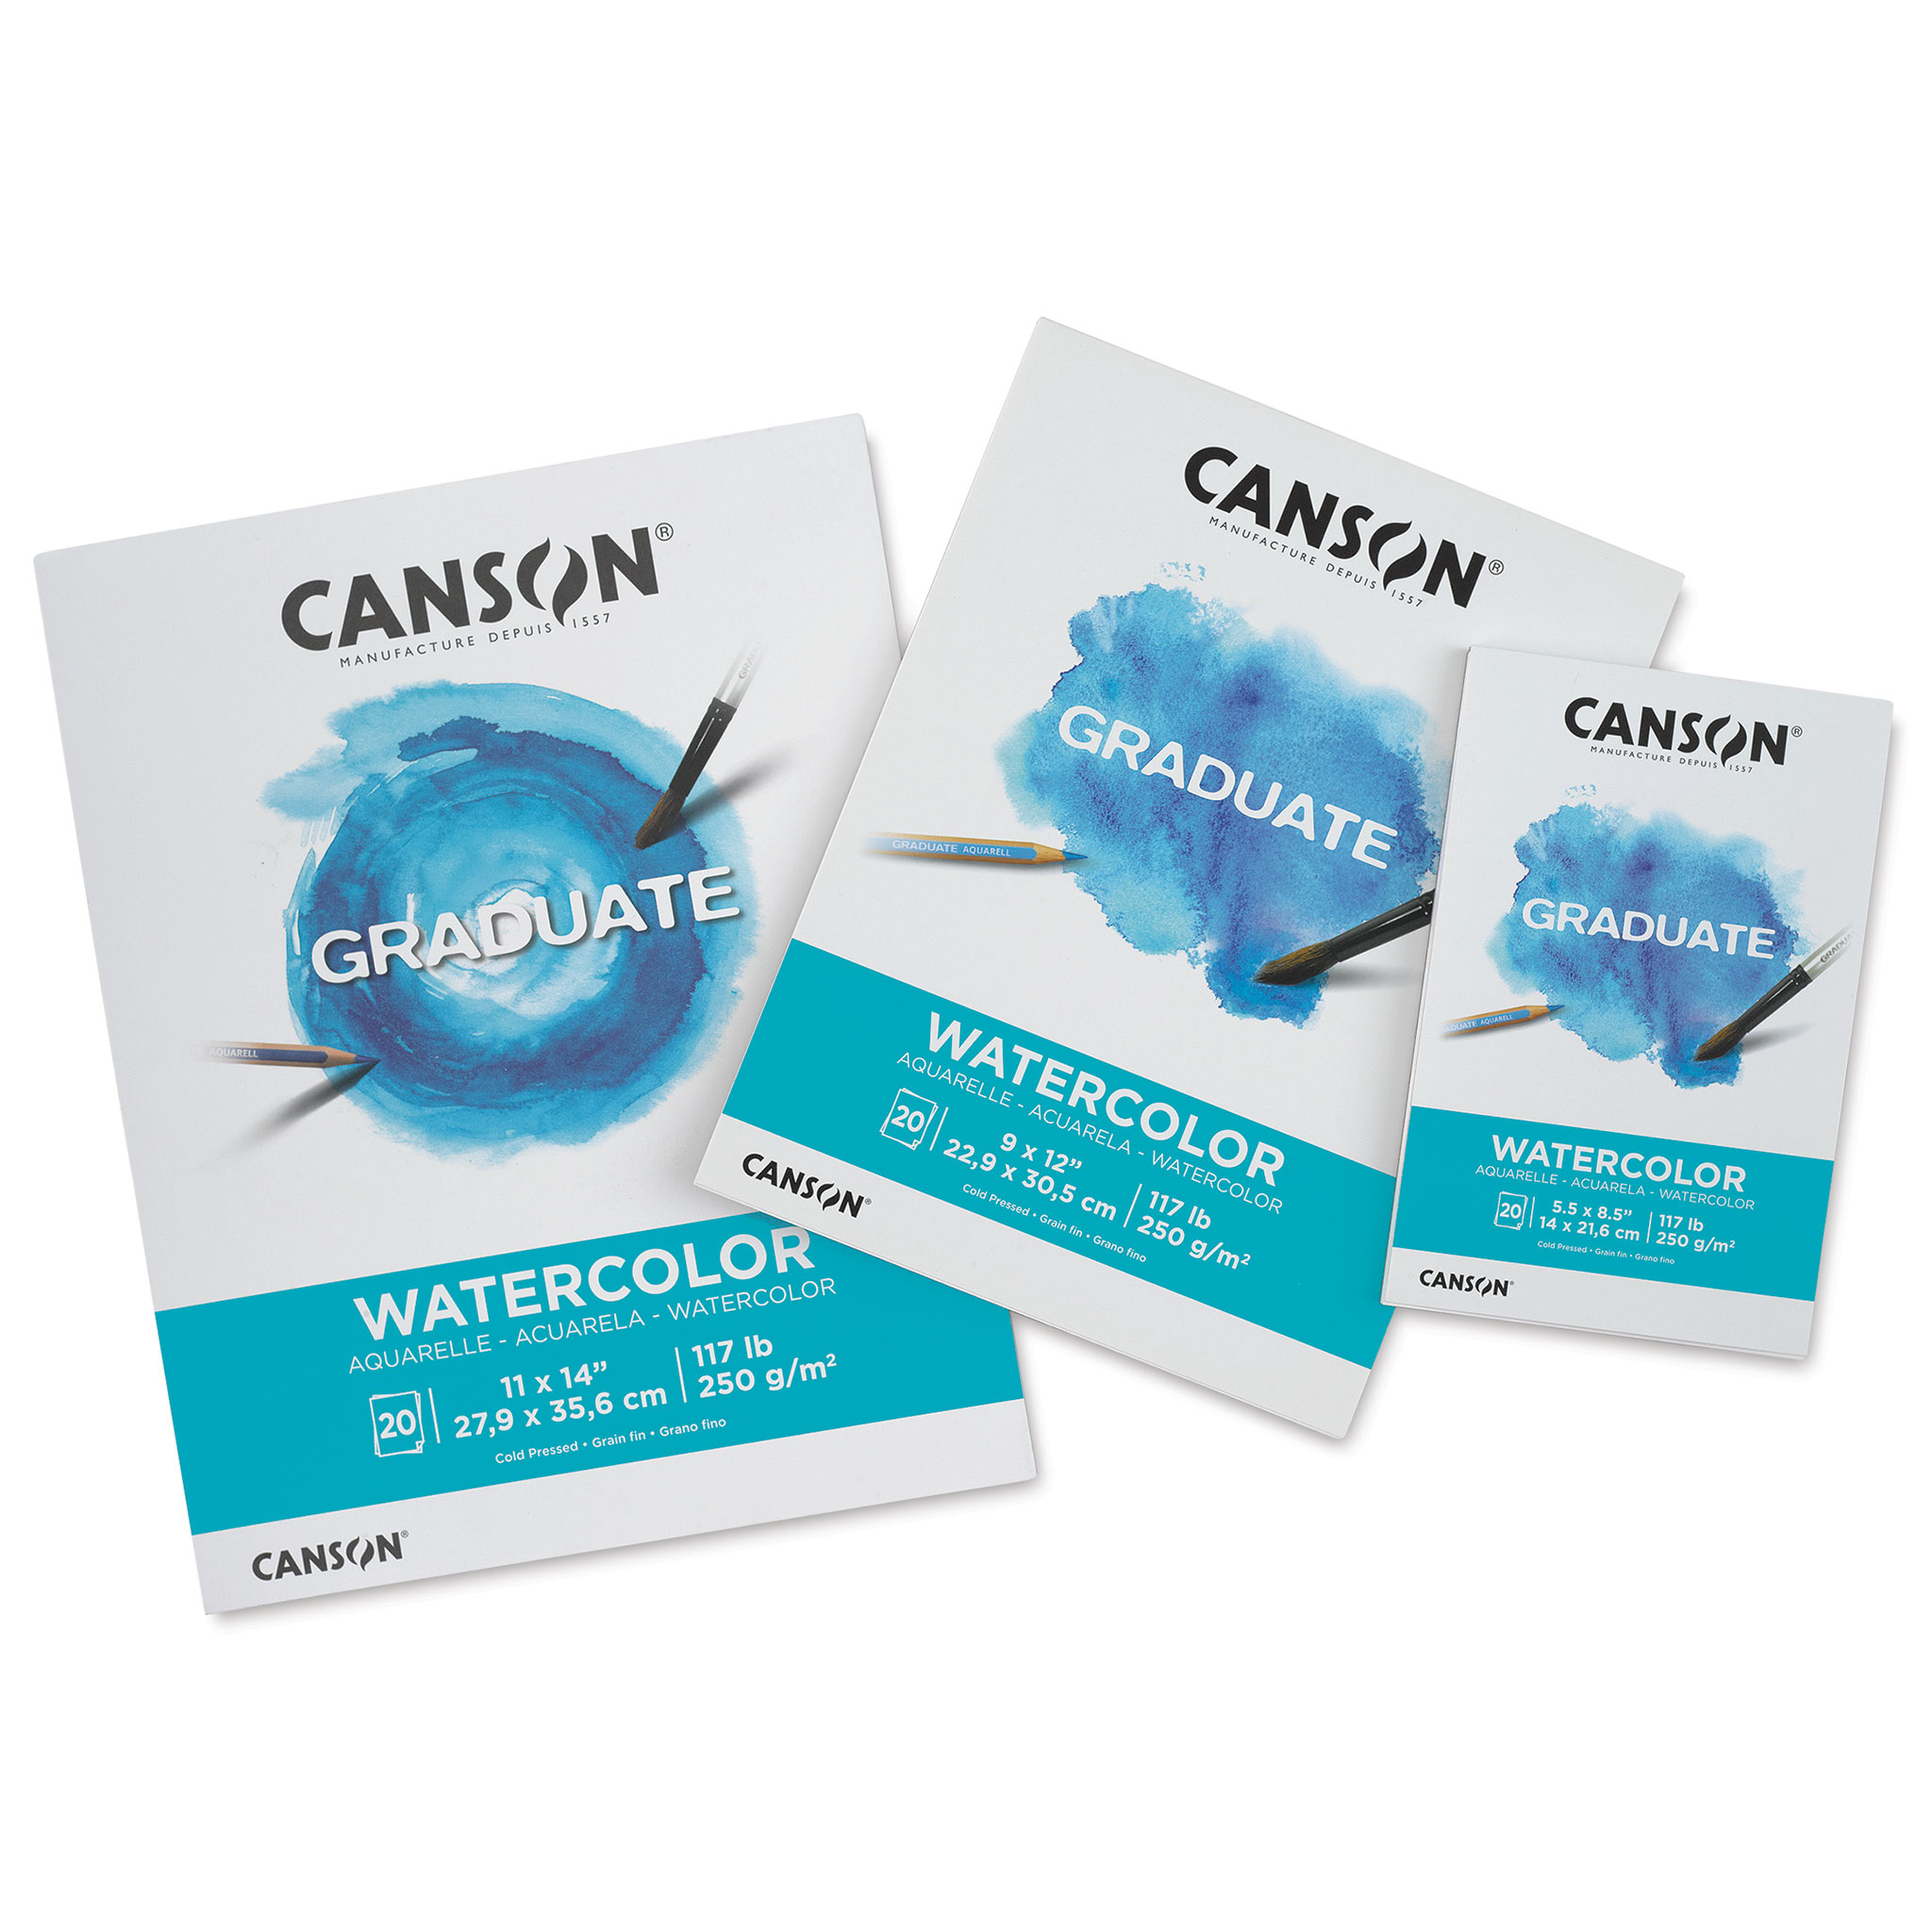 Canson Graduate 9x12 Drawing Paper Pad (30 Sheets)